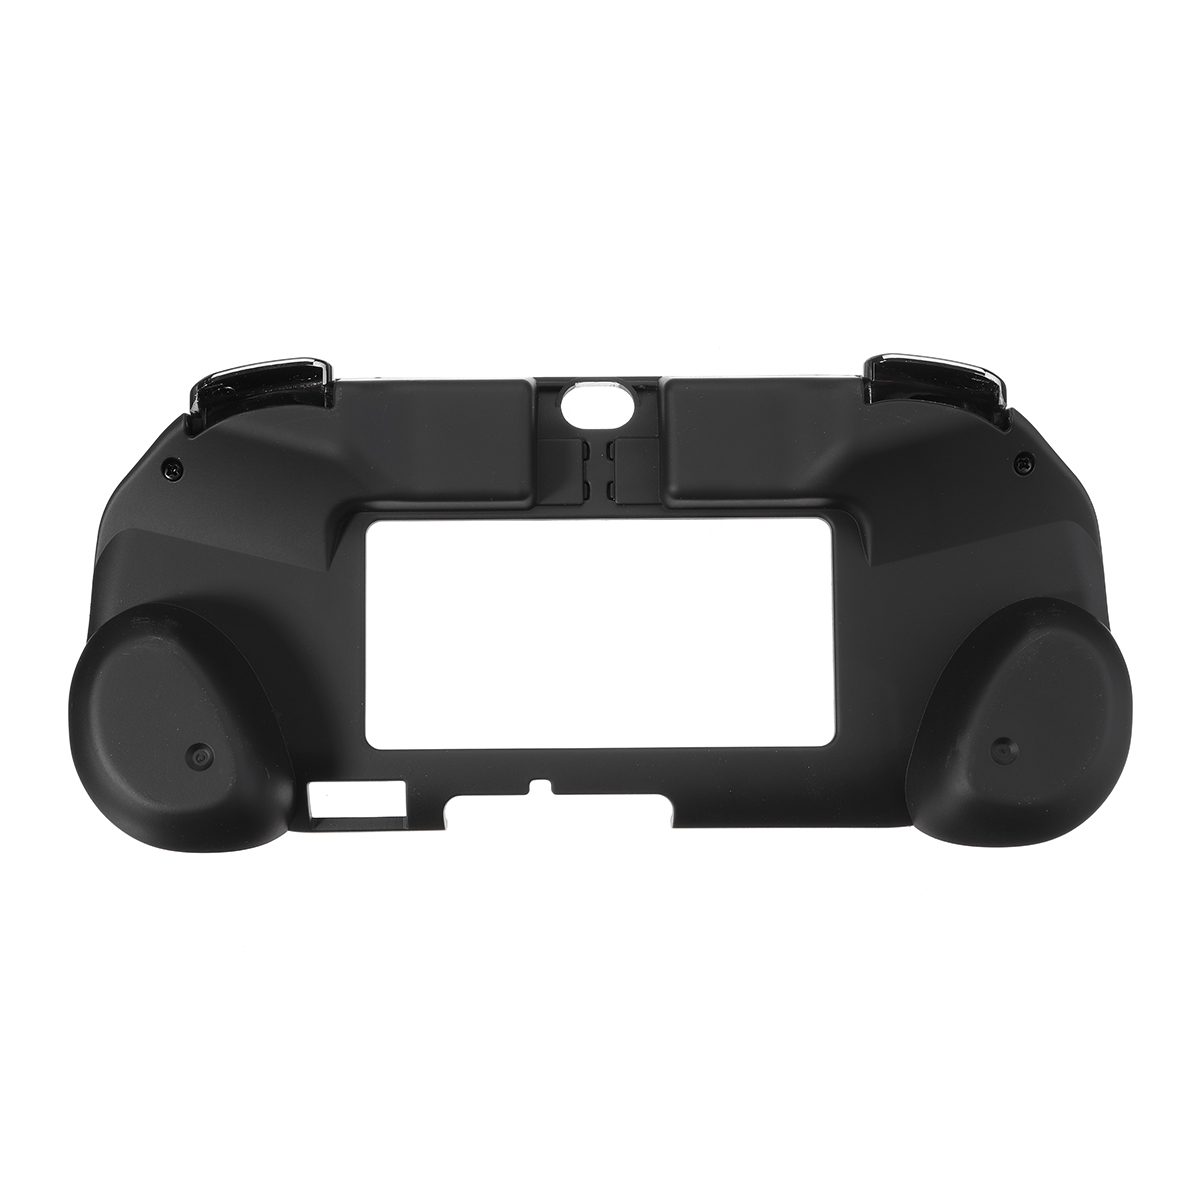 L2 R2 Trigger Grips Handle Shell Protective Case for Sony PlayStation PS Vita 2000 Game Console 21